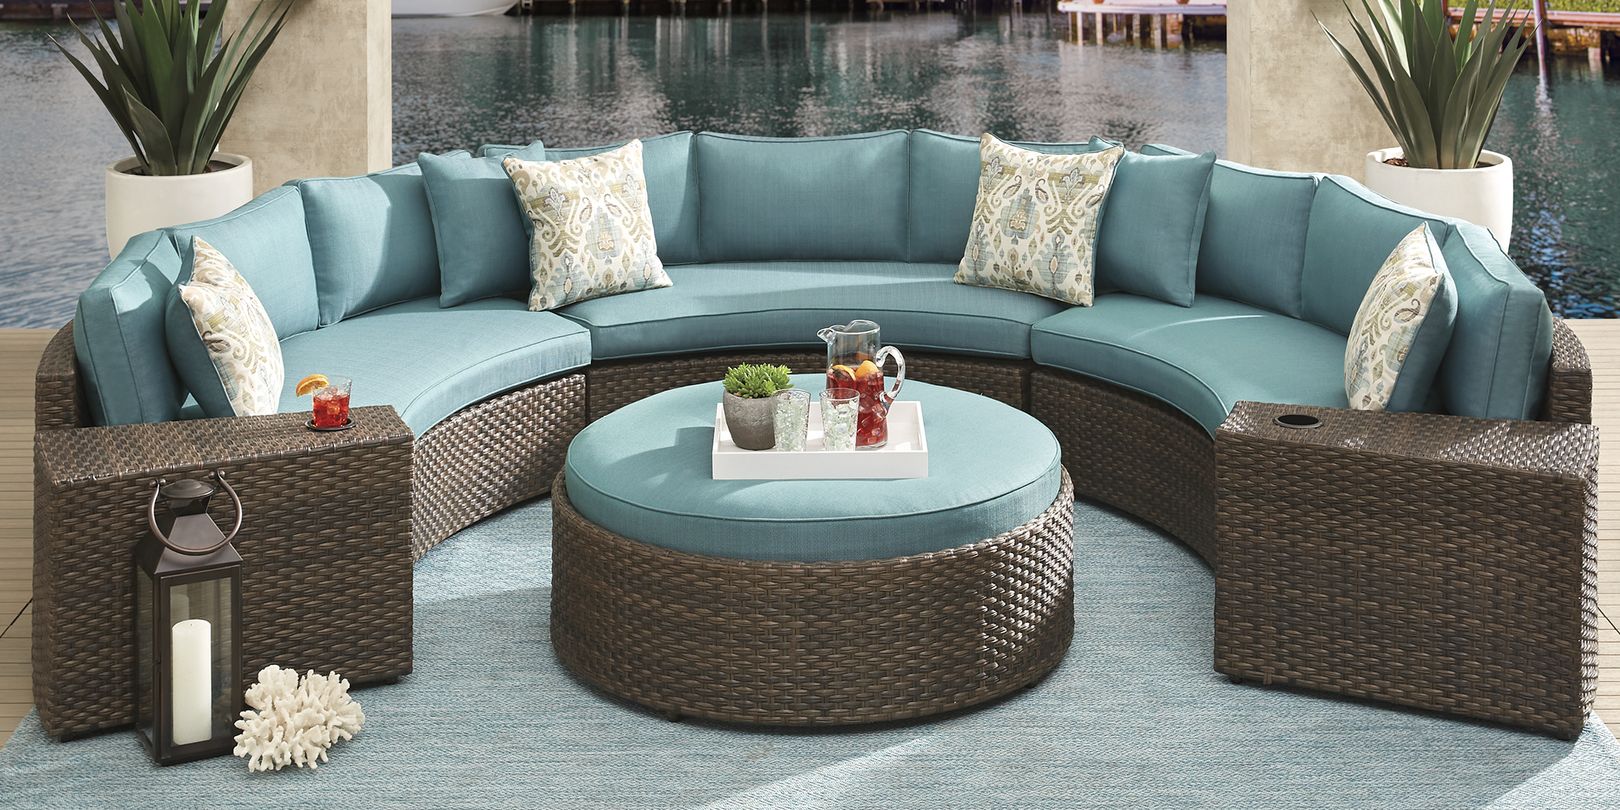 Photo of curved outdoor sectional with seafoam cushions